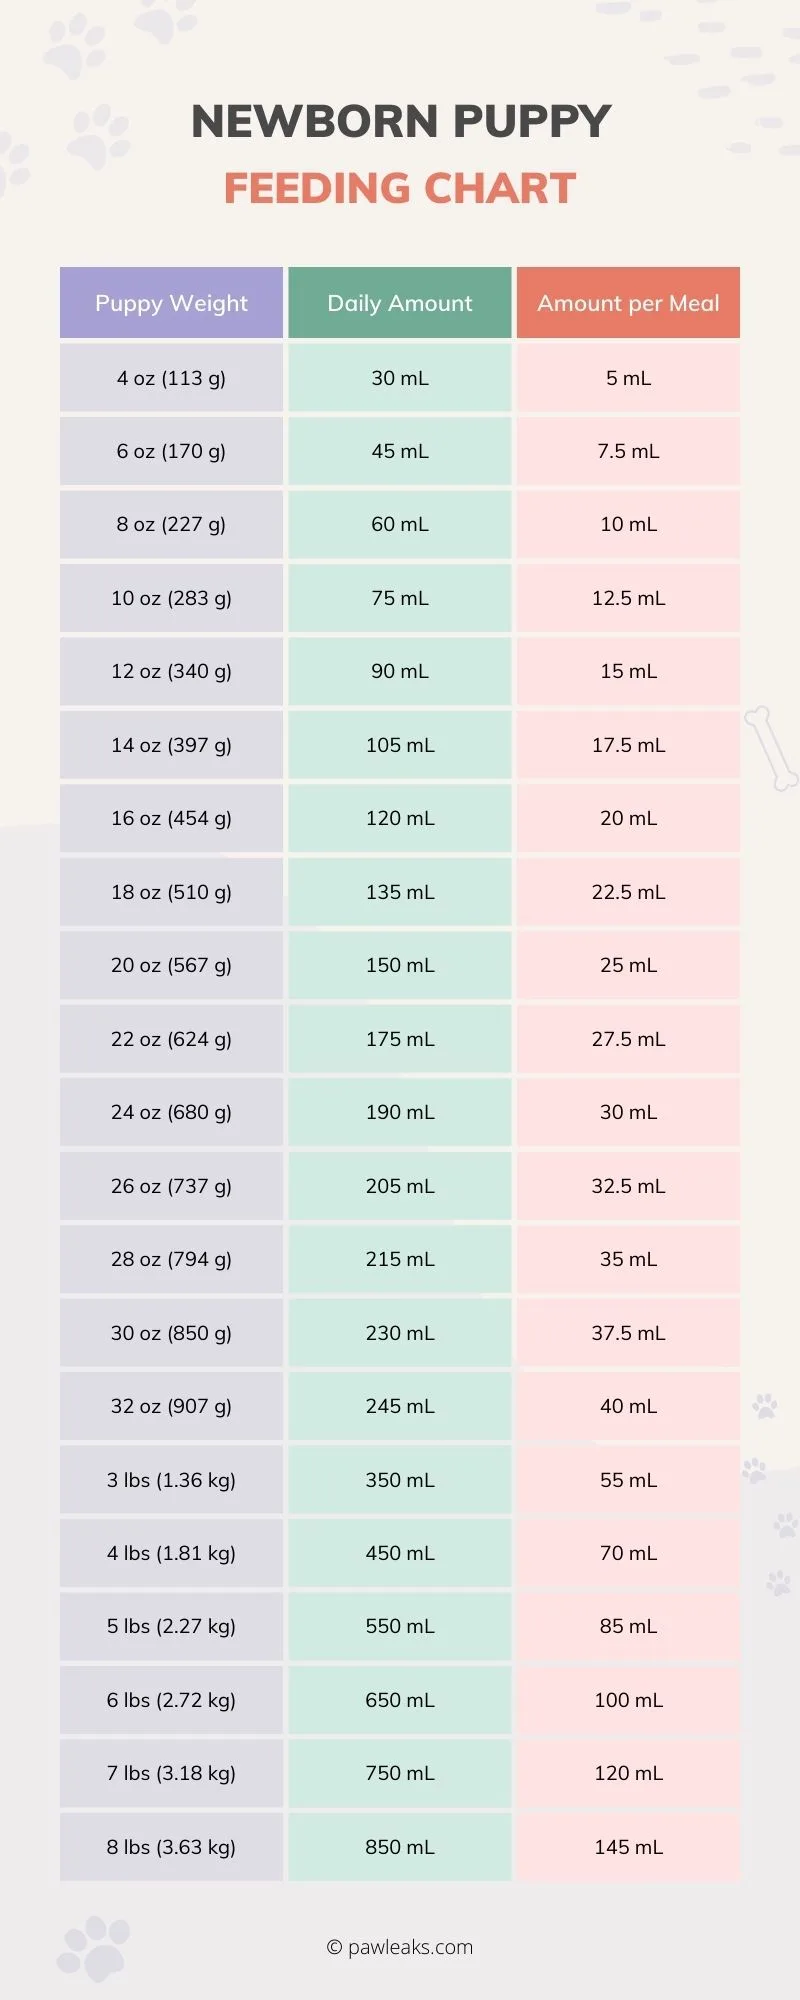 Newborn puppy feeding chart explaining how much to feed a puppy daily and per feeding based on the bodyweight from 4 oz up to 8 pounds.